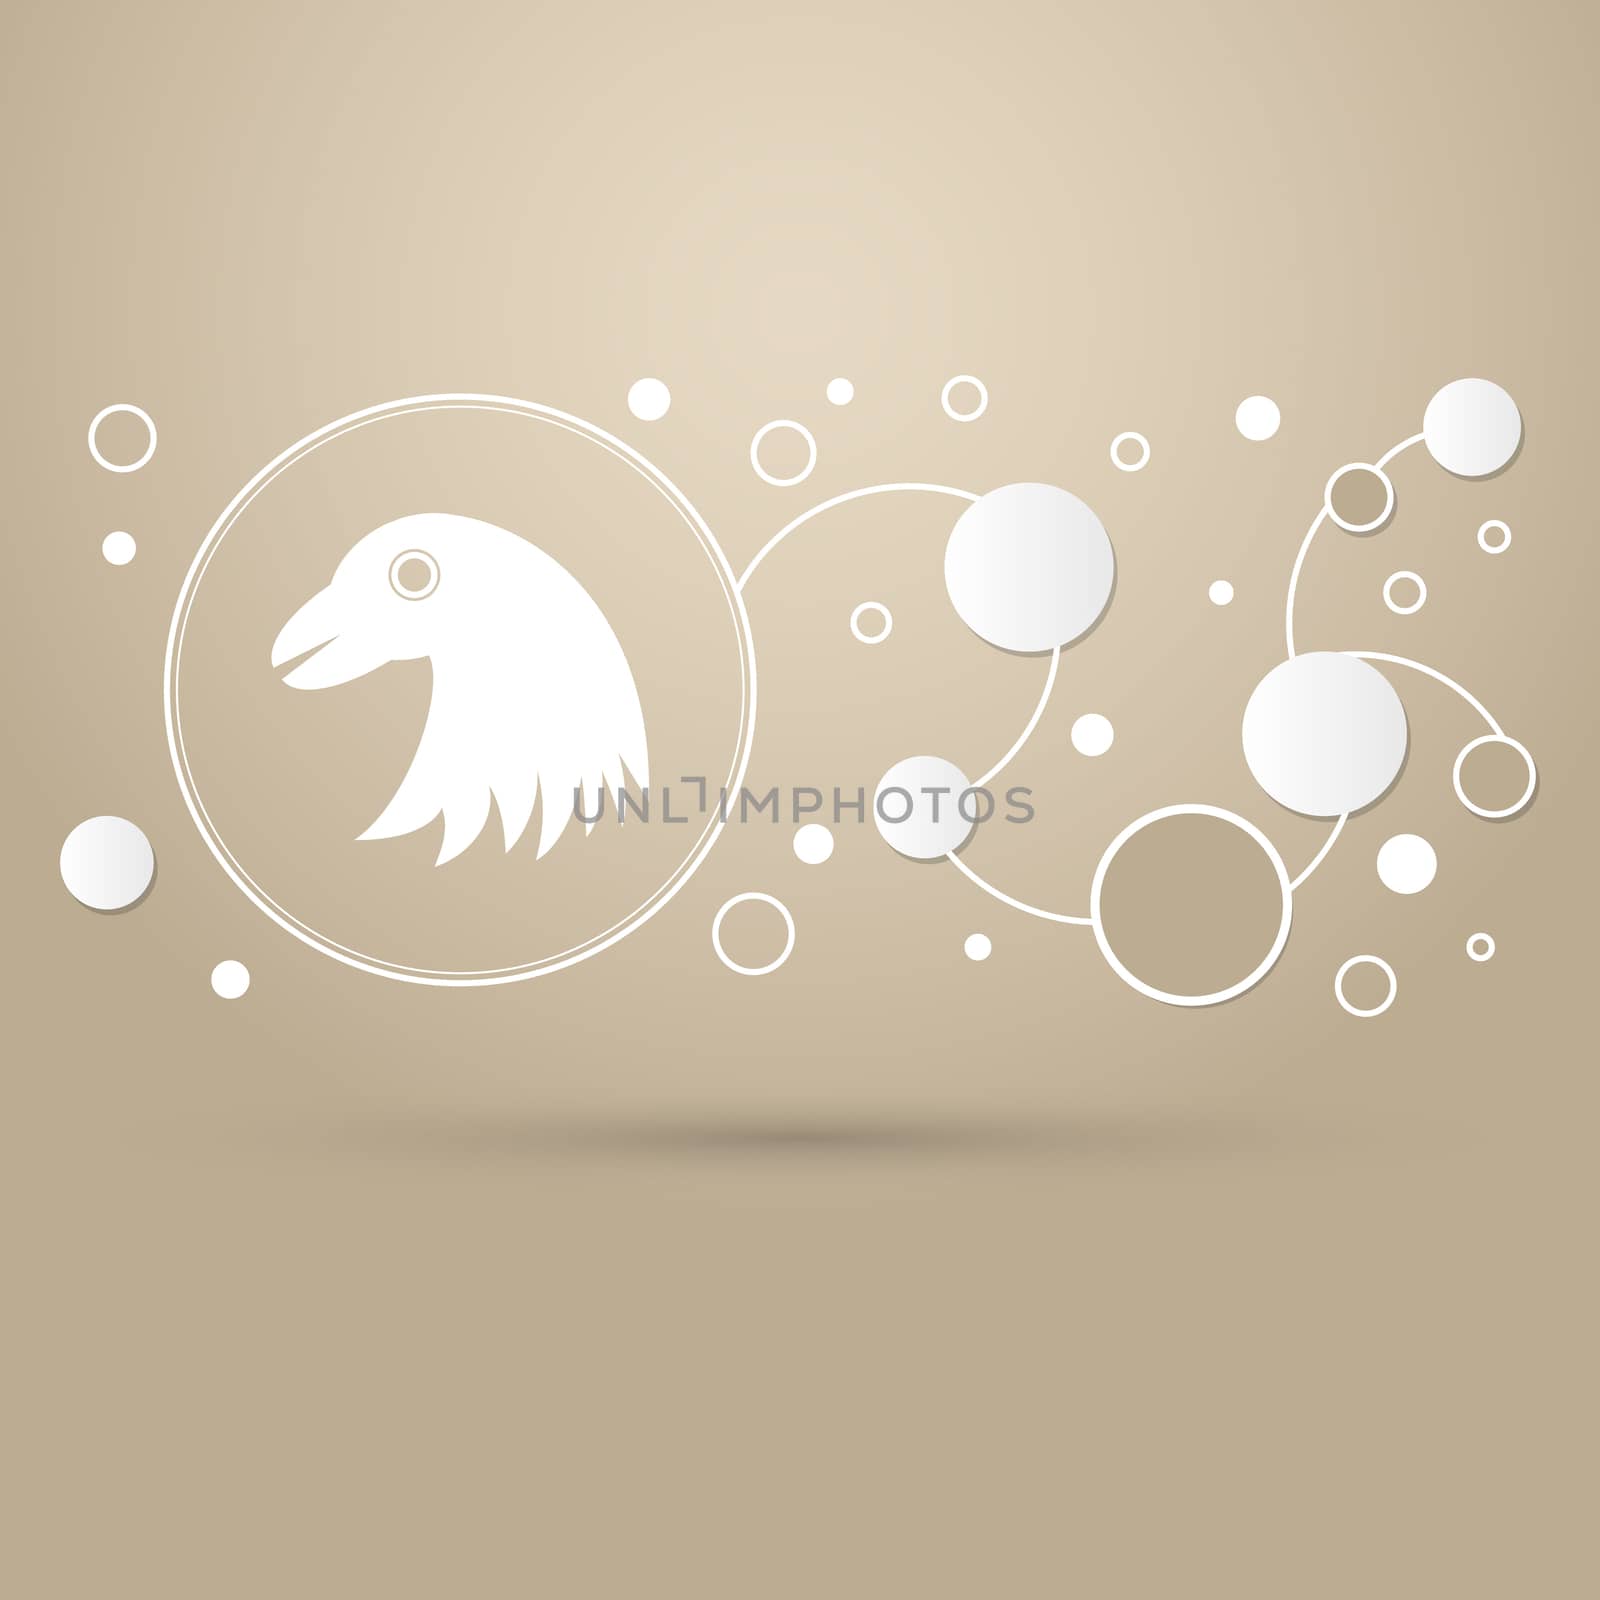 eagle icon on a brown background with elegant style and modern design infographic. illustration